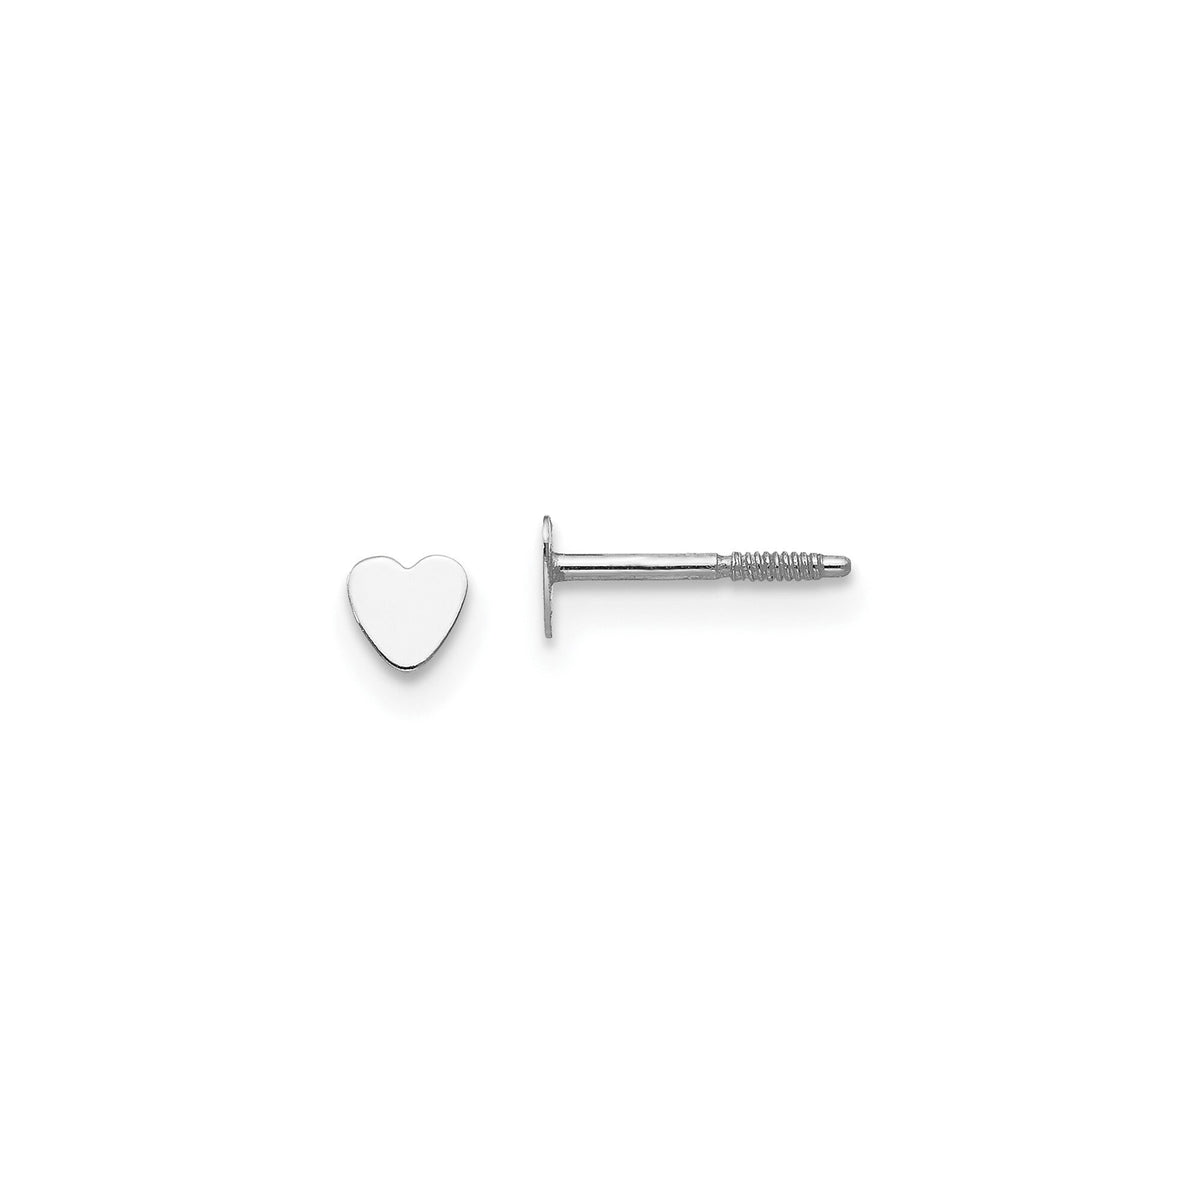 14k White Gold Tiny Heart Baby Post Earrings with Gift Box Included Toddler Earrings Infant Size